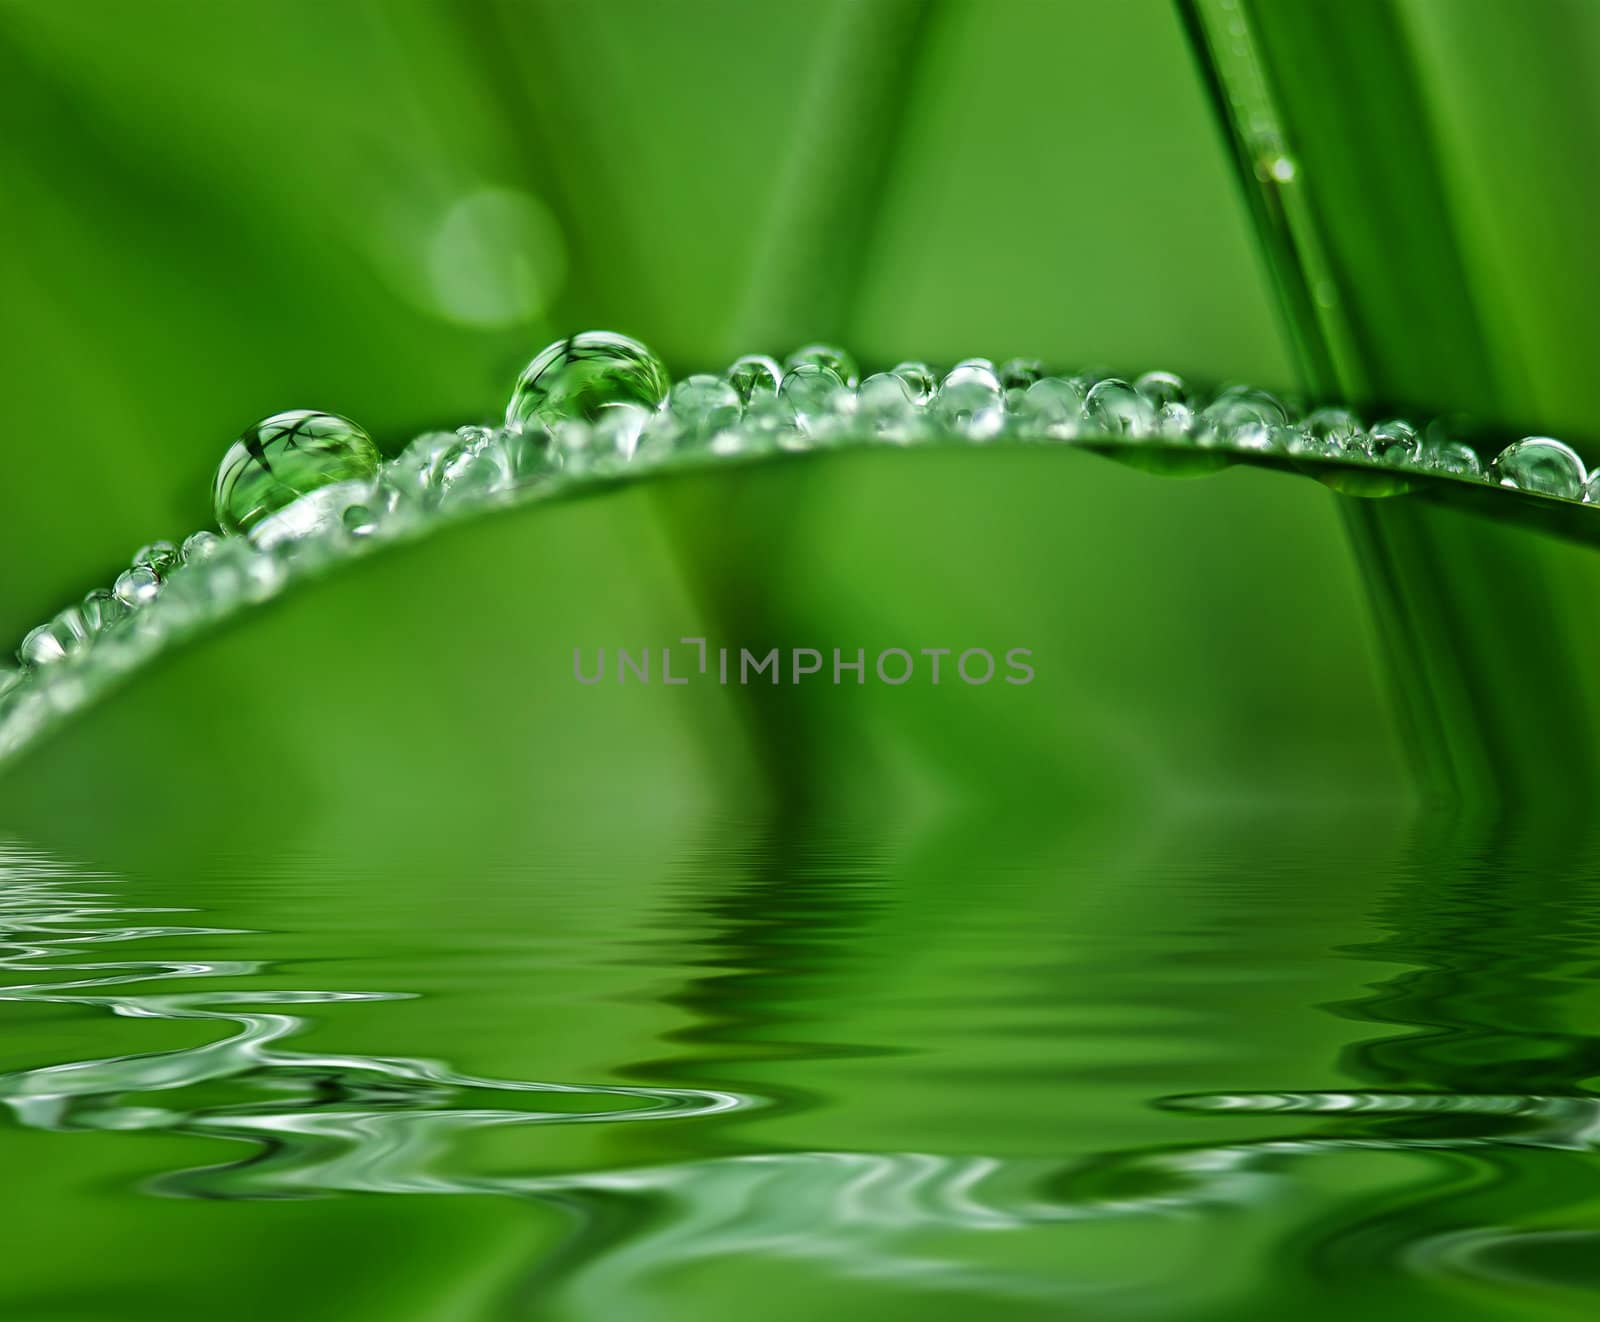 The grass after the rain by xfdly5